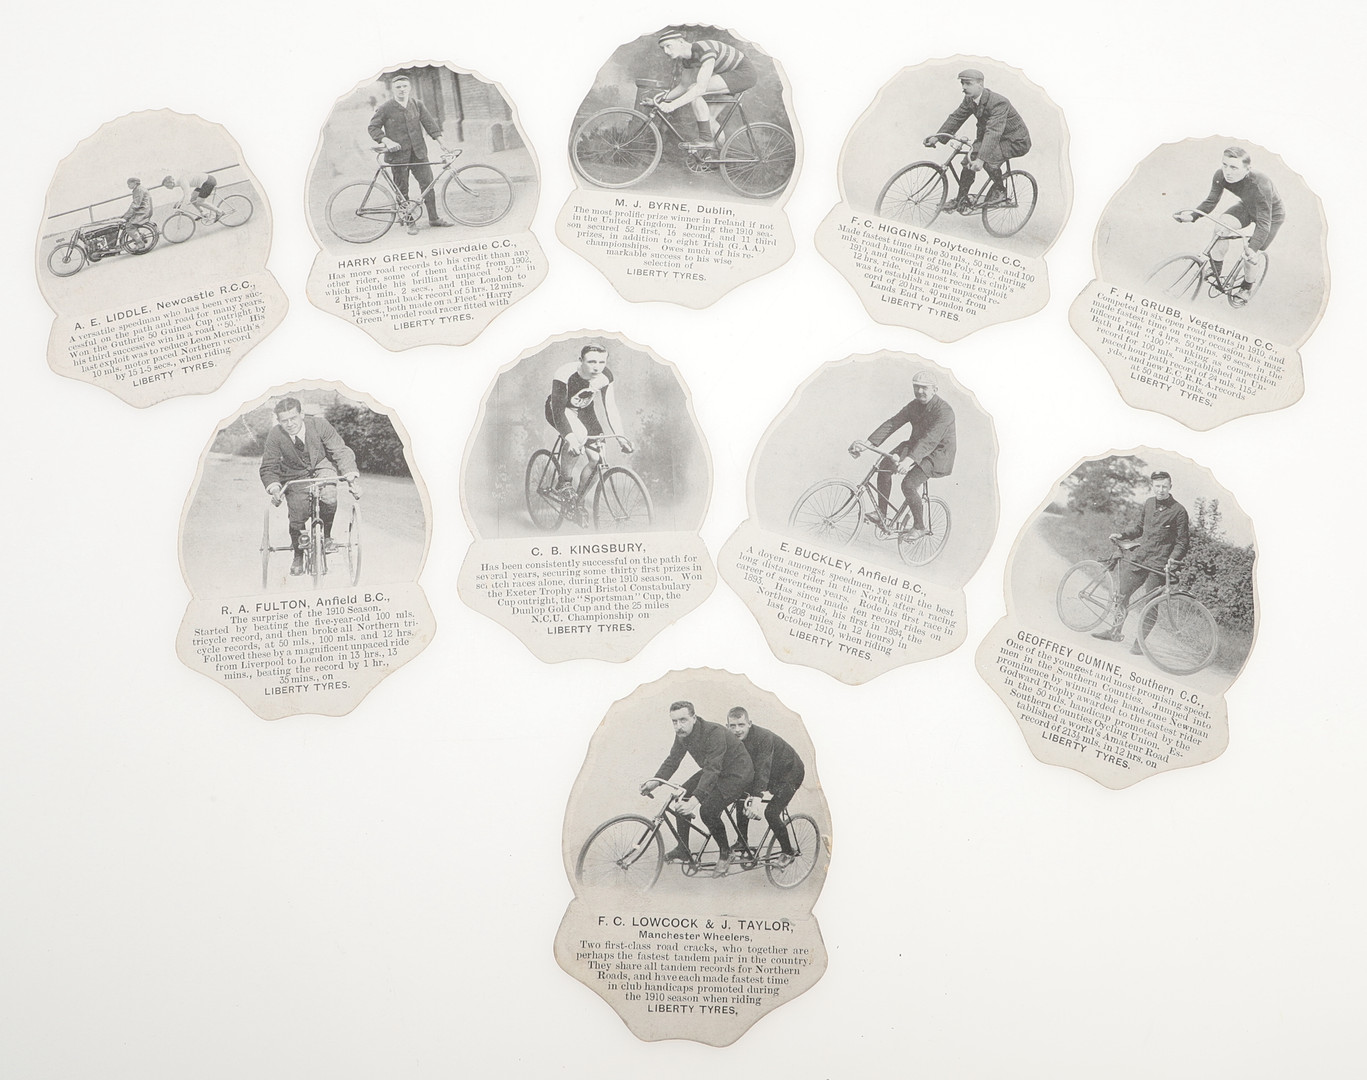 LARGE COLLECTION OF EARLY CYCLING GOLD & SILVER MEDALS, & EPHEMERA - FREDERICK LOWCOCK. - Image 94 of 155